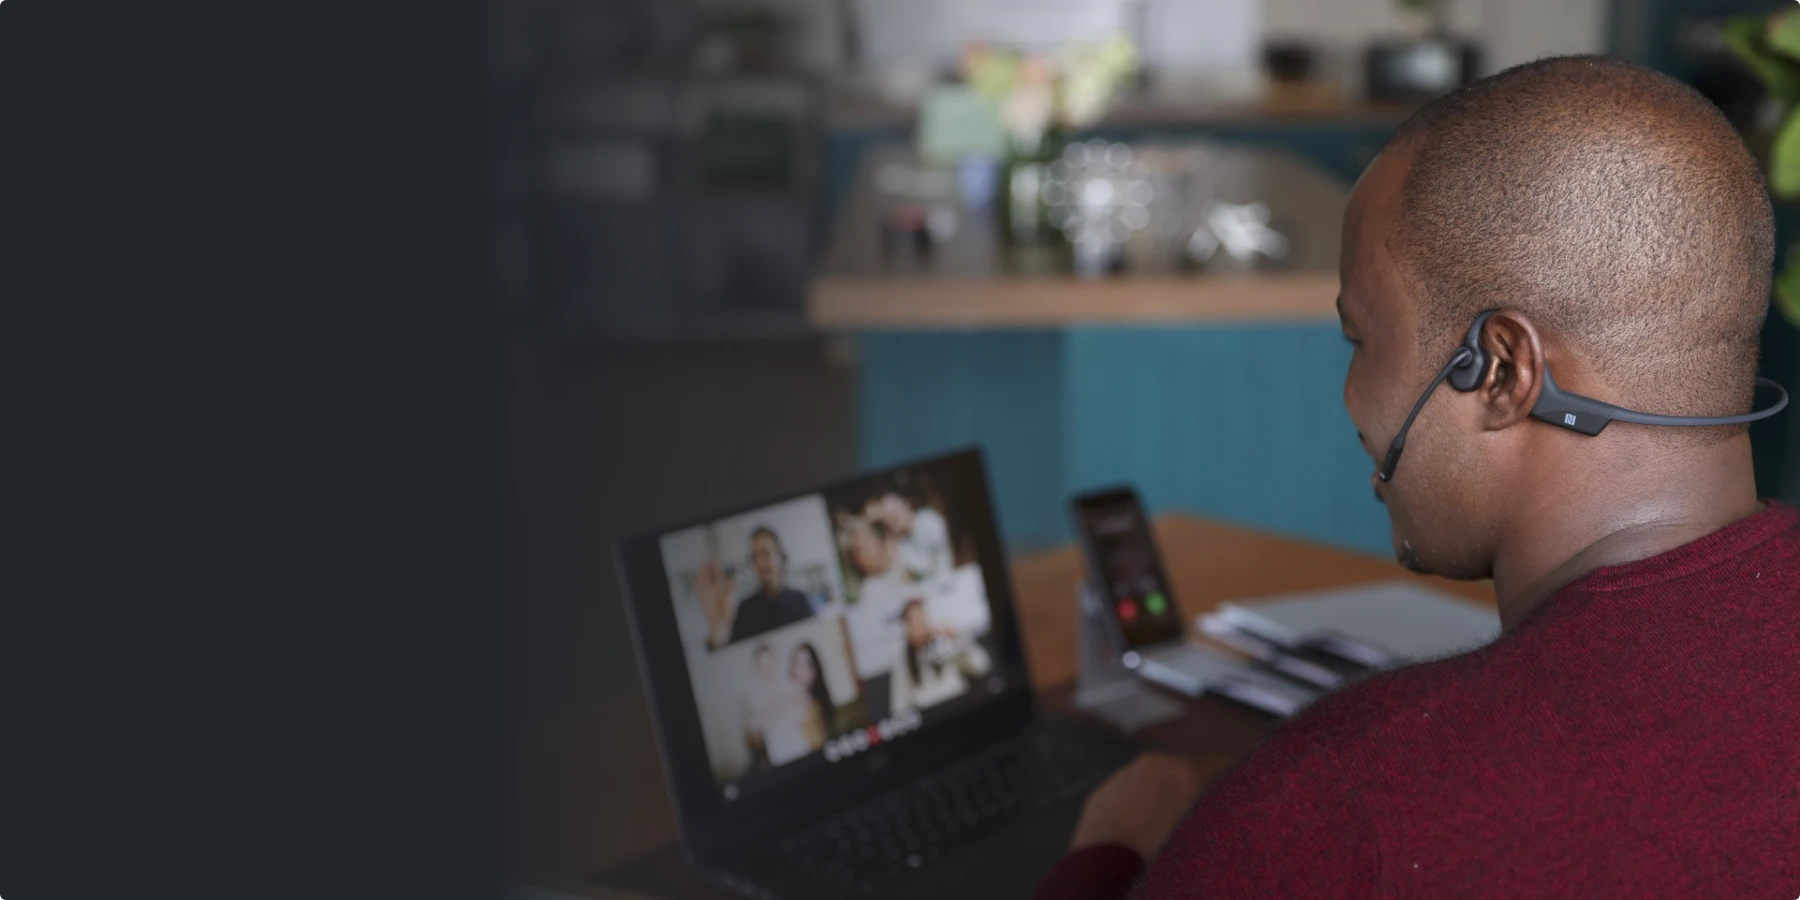 The headset can be paired to up to two devices at a time and offers easy switching capabilities for seamless connection and more improved work efficiency.